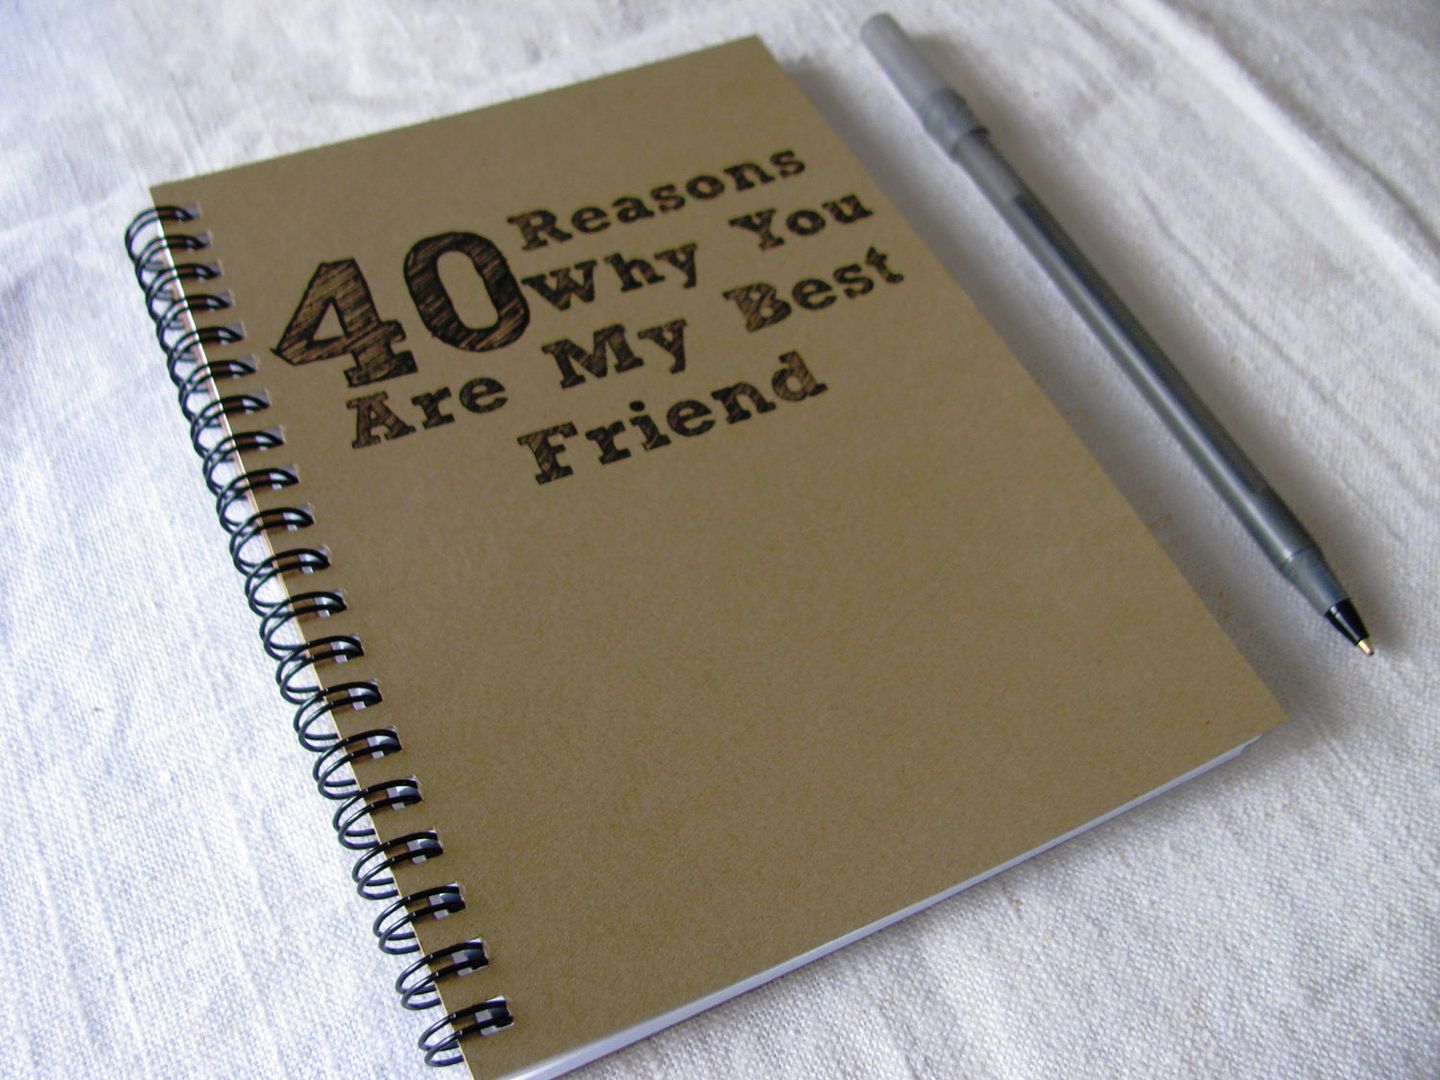 40 reasons you're my best friend journal | Affordable, semi-homemade DIY gift for a BFF